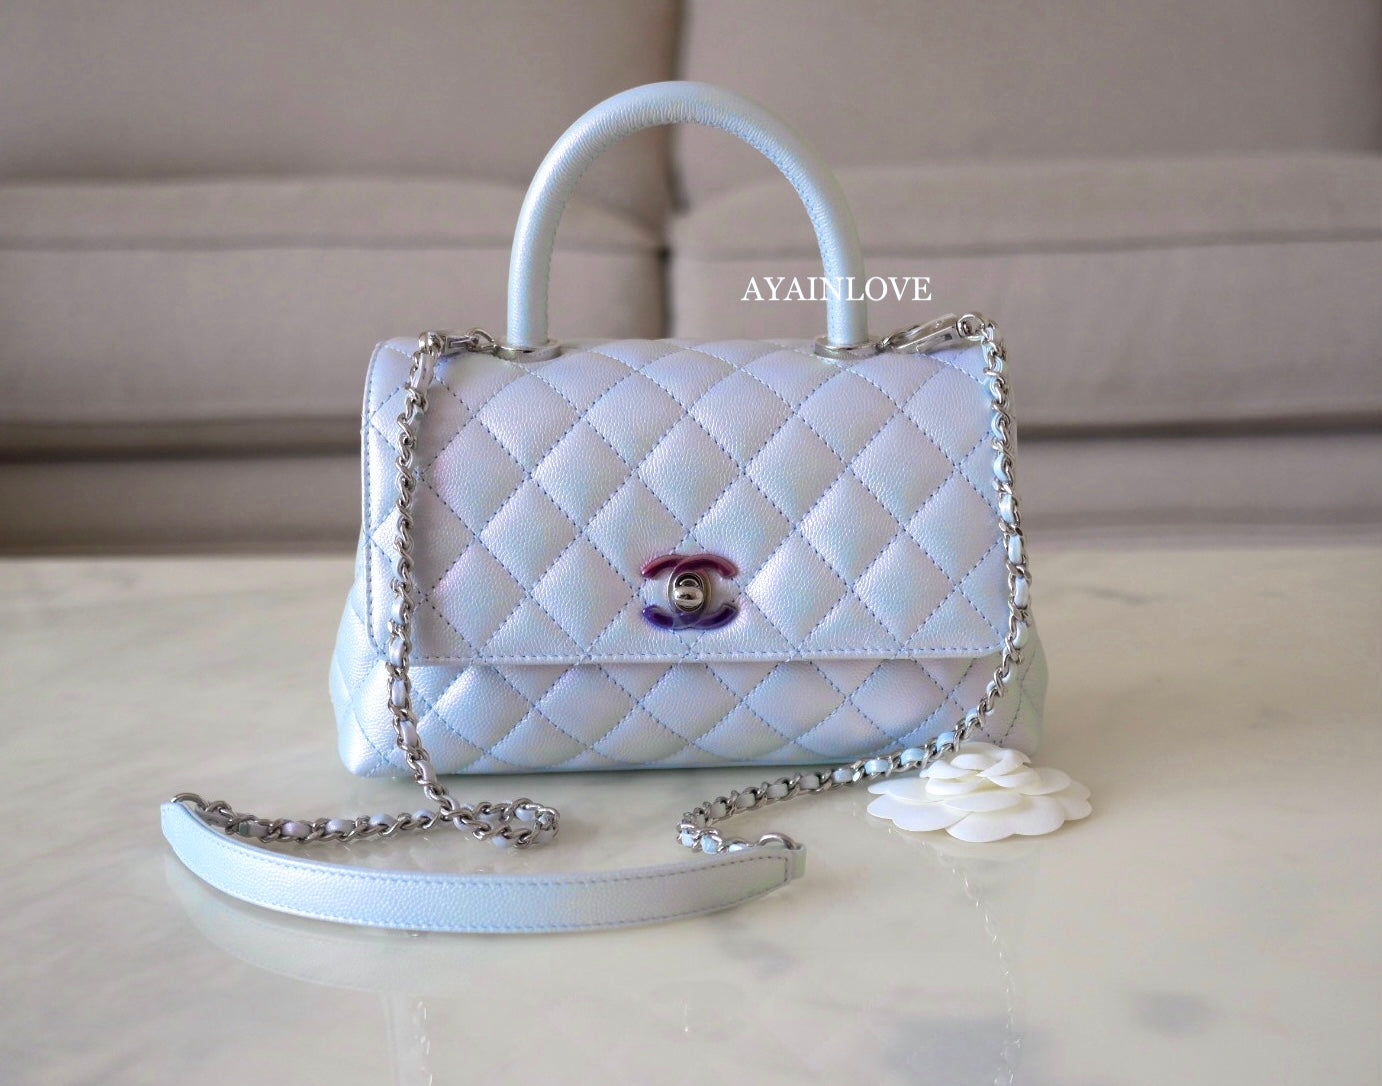 Chanel Coco Handle Mini As2215 B10382 10601, White, One Size